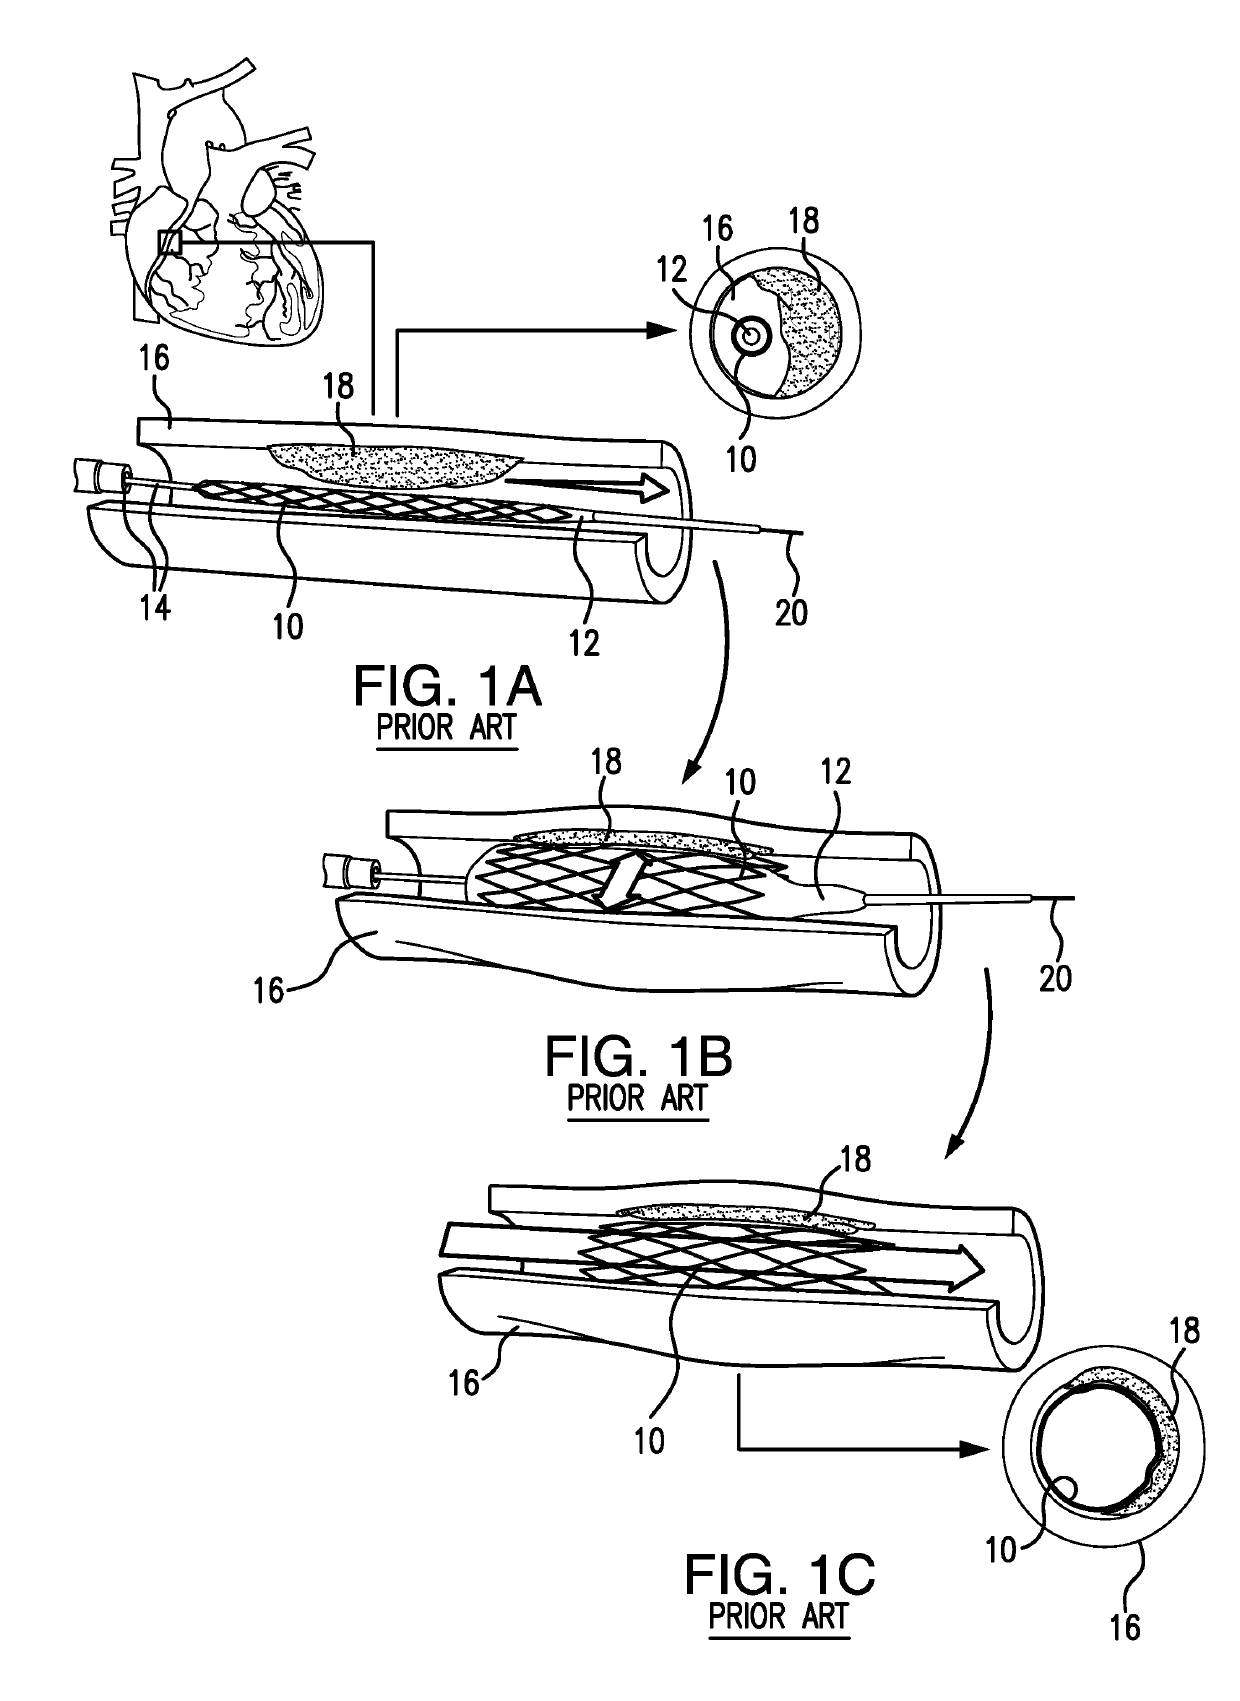 Intravascular delivery system and method for percutaneous coronary intervention